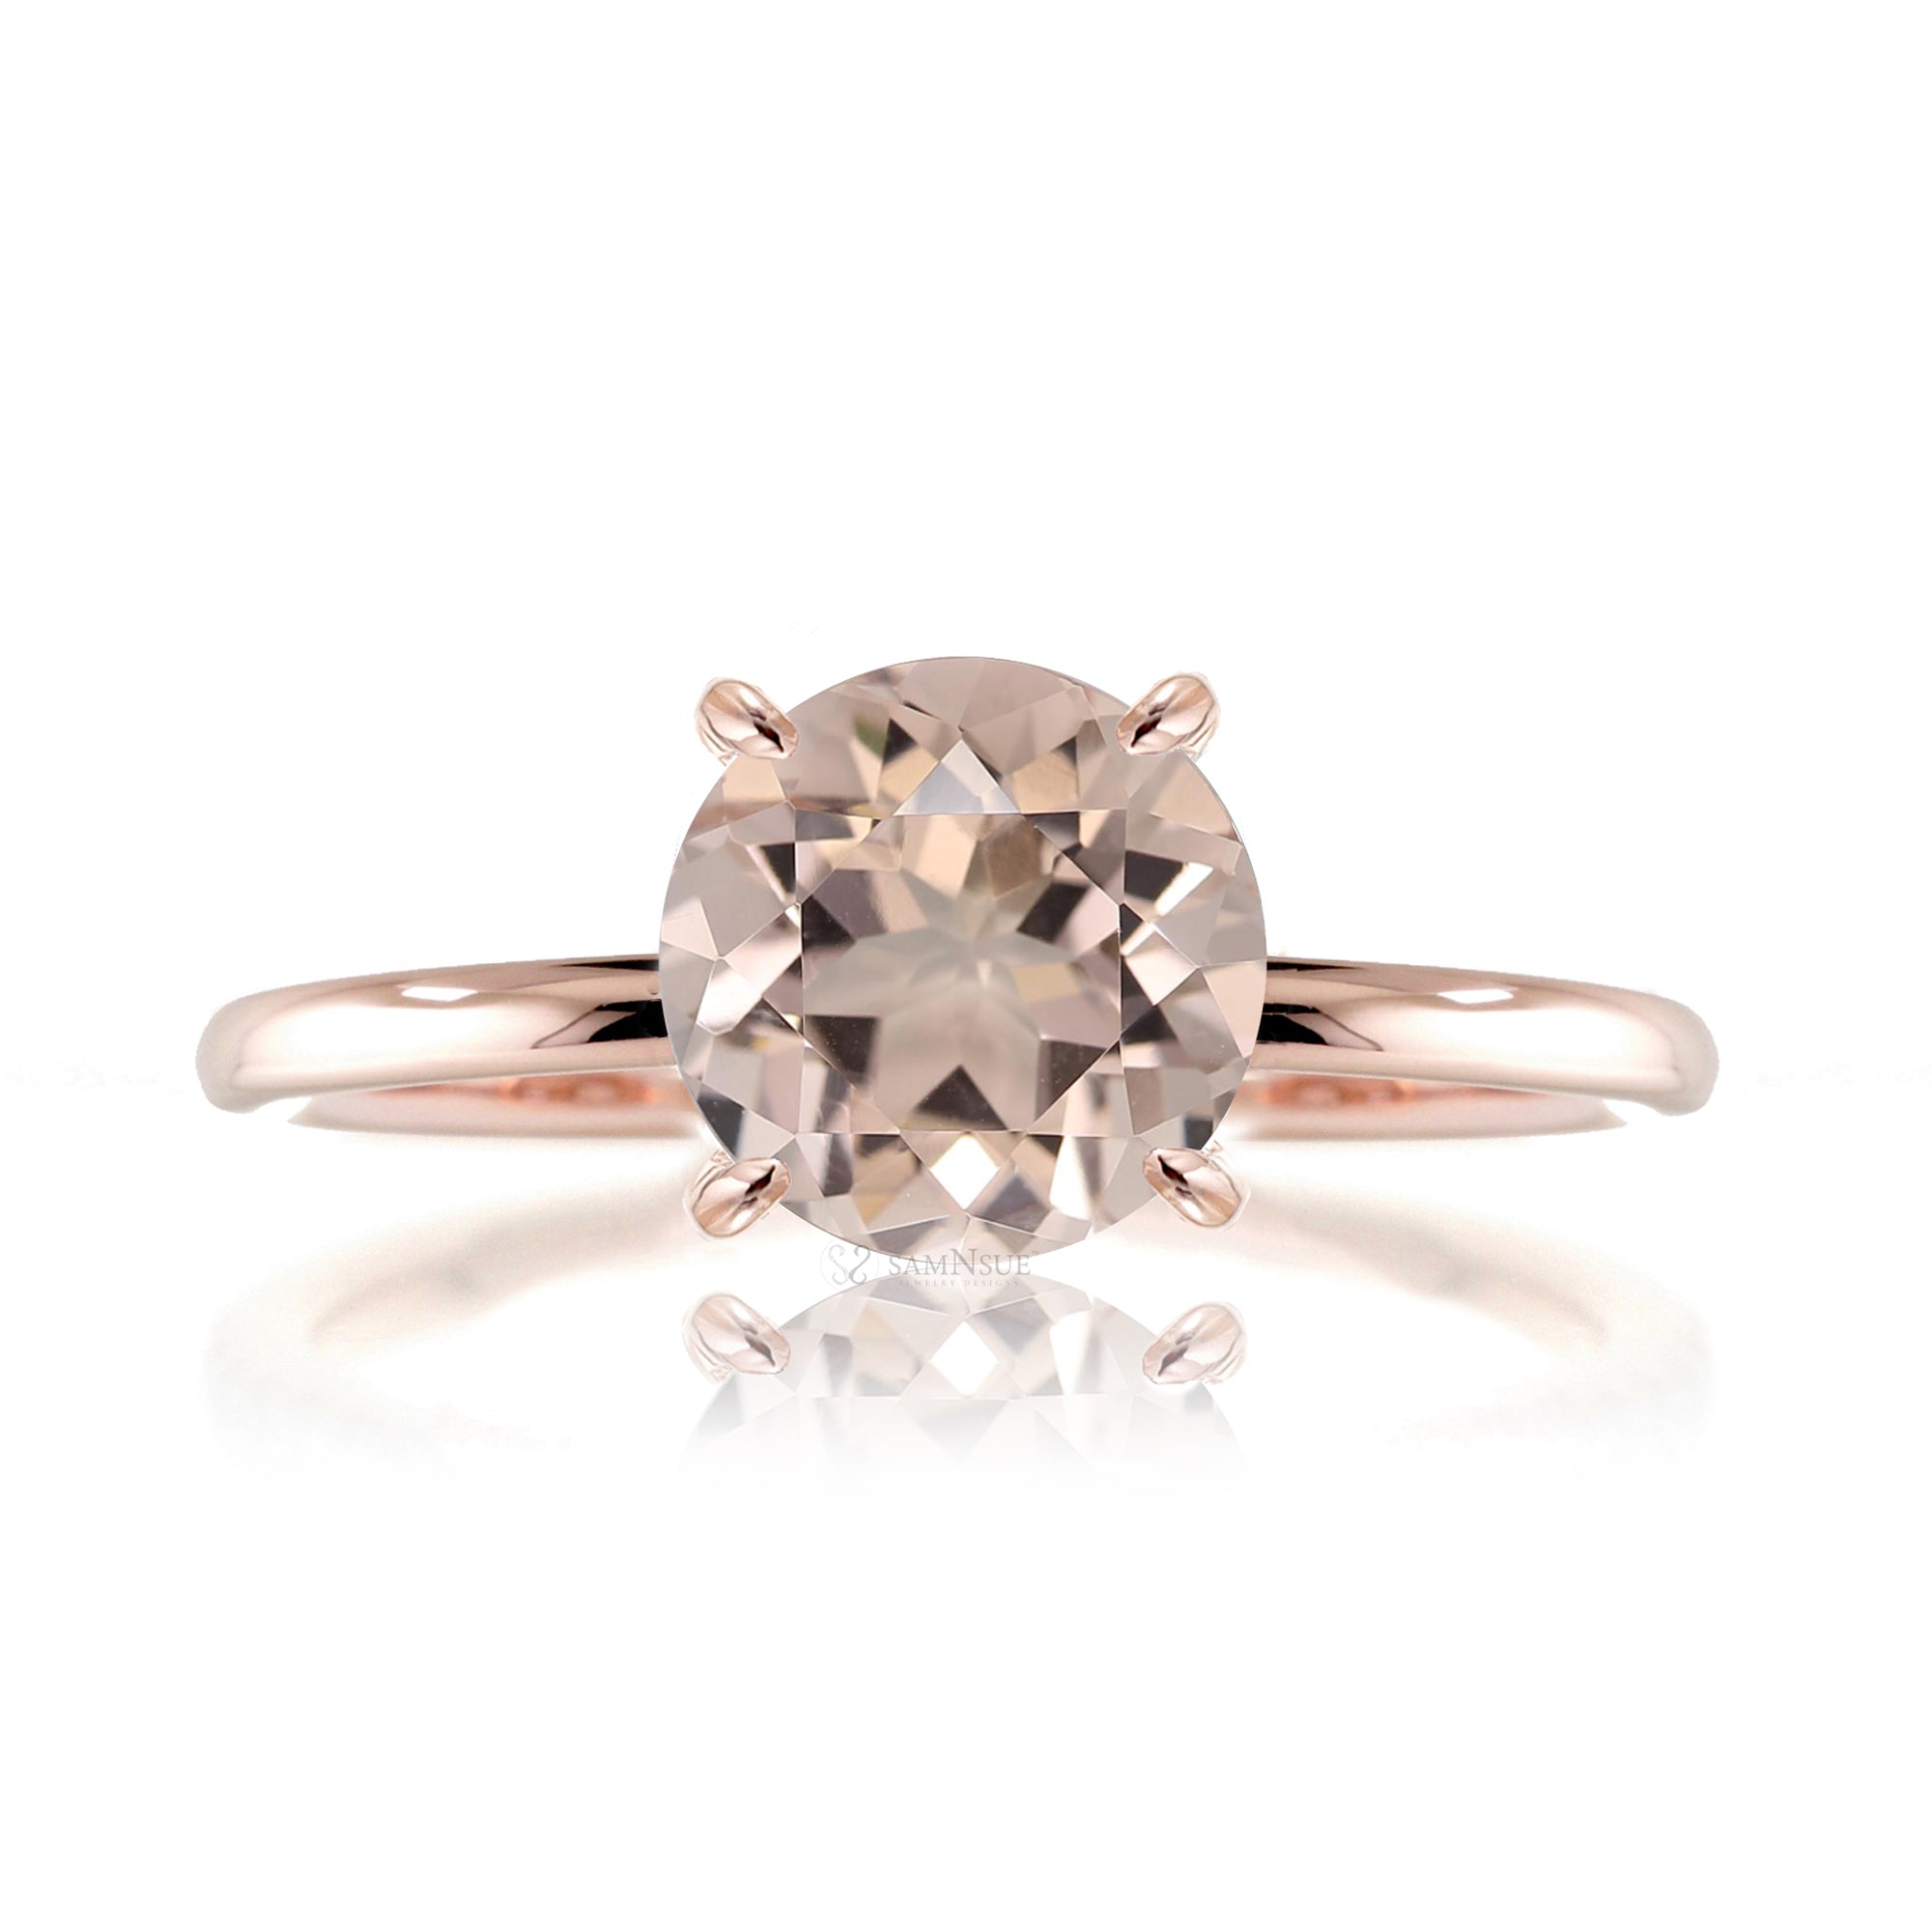 Round morganite solid band ring in rose gold - The Ava